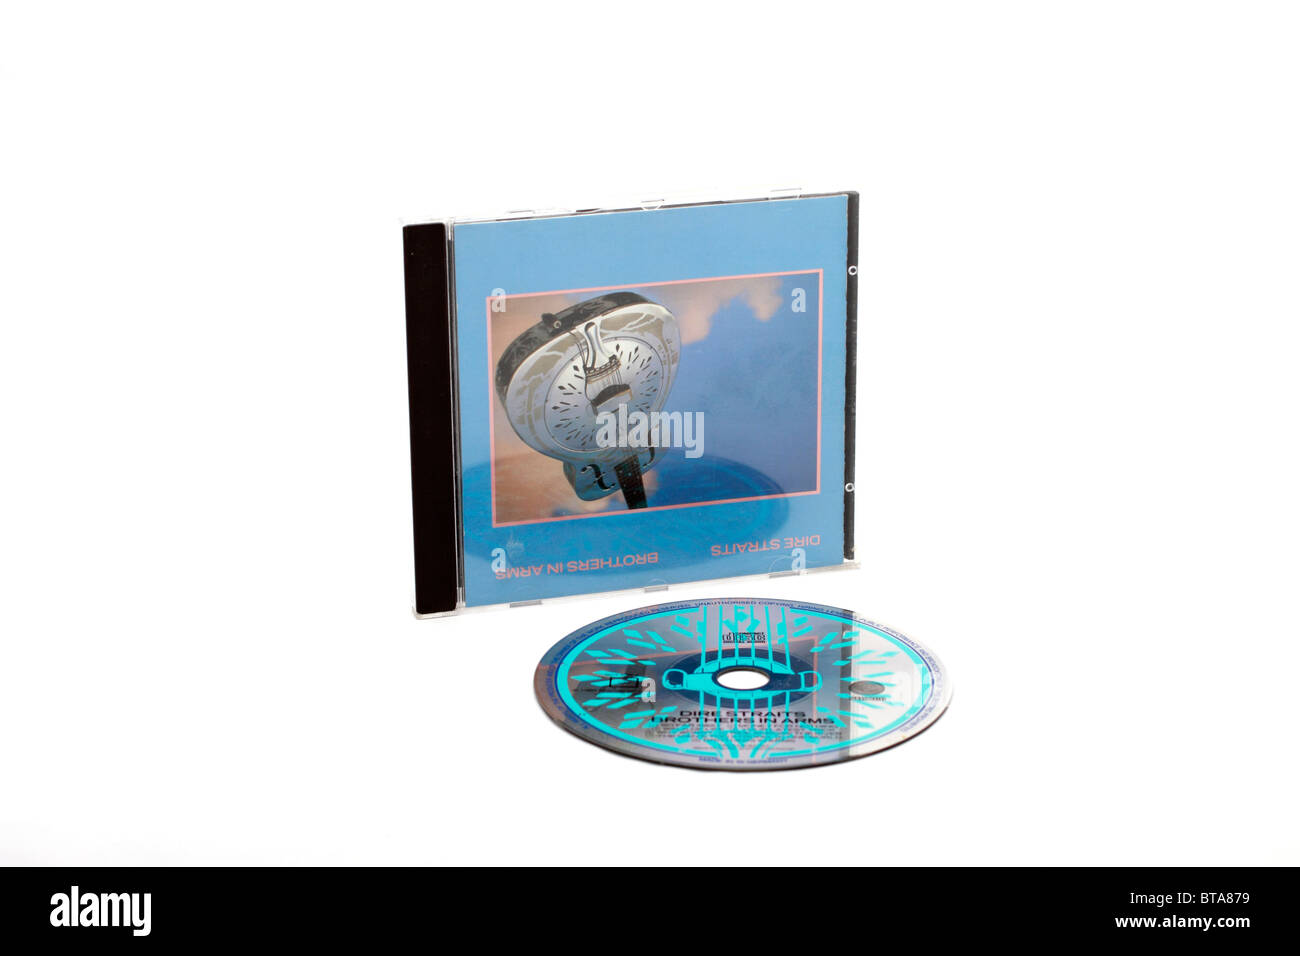 Brothers in Arms CD da Dire Straits Foto Stock